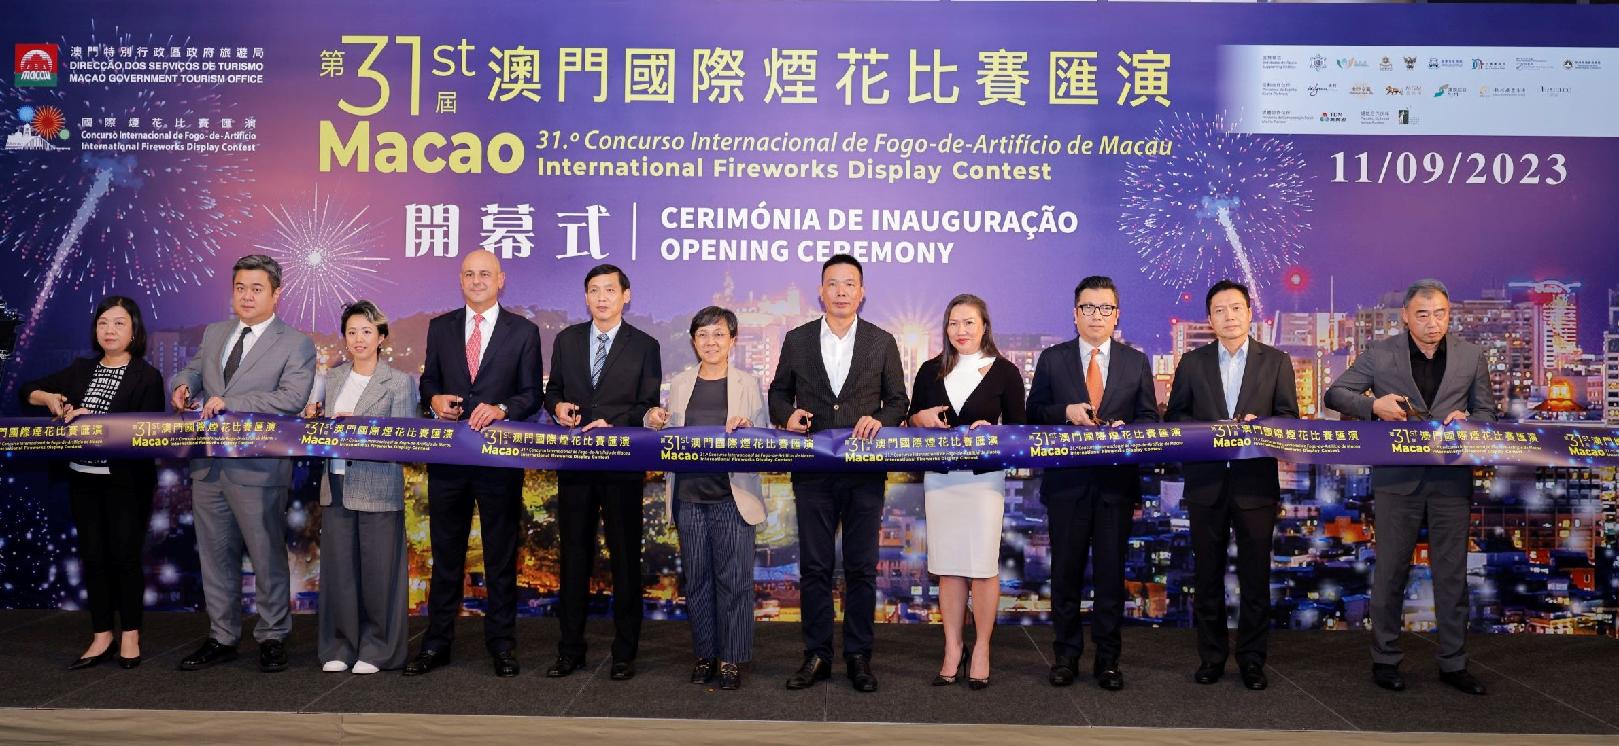 Guests officiate the opening ceremony for the 31st Macao International Fireworks Display Contest